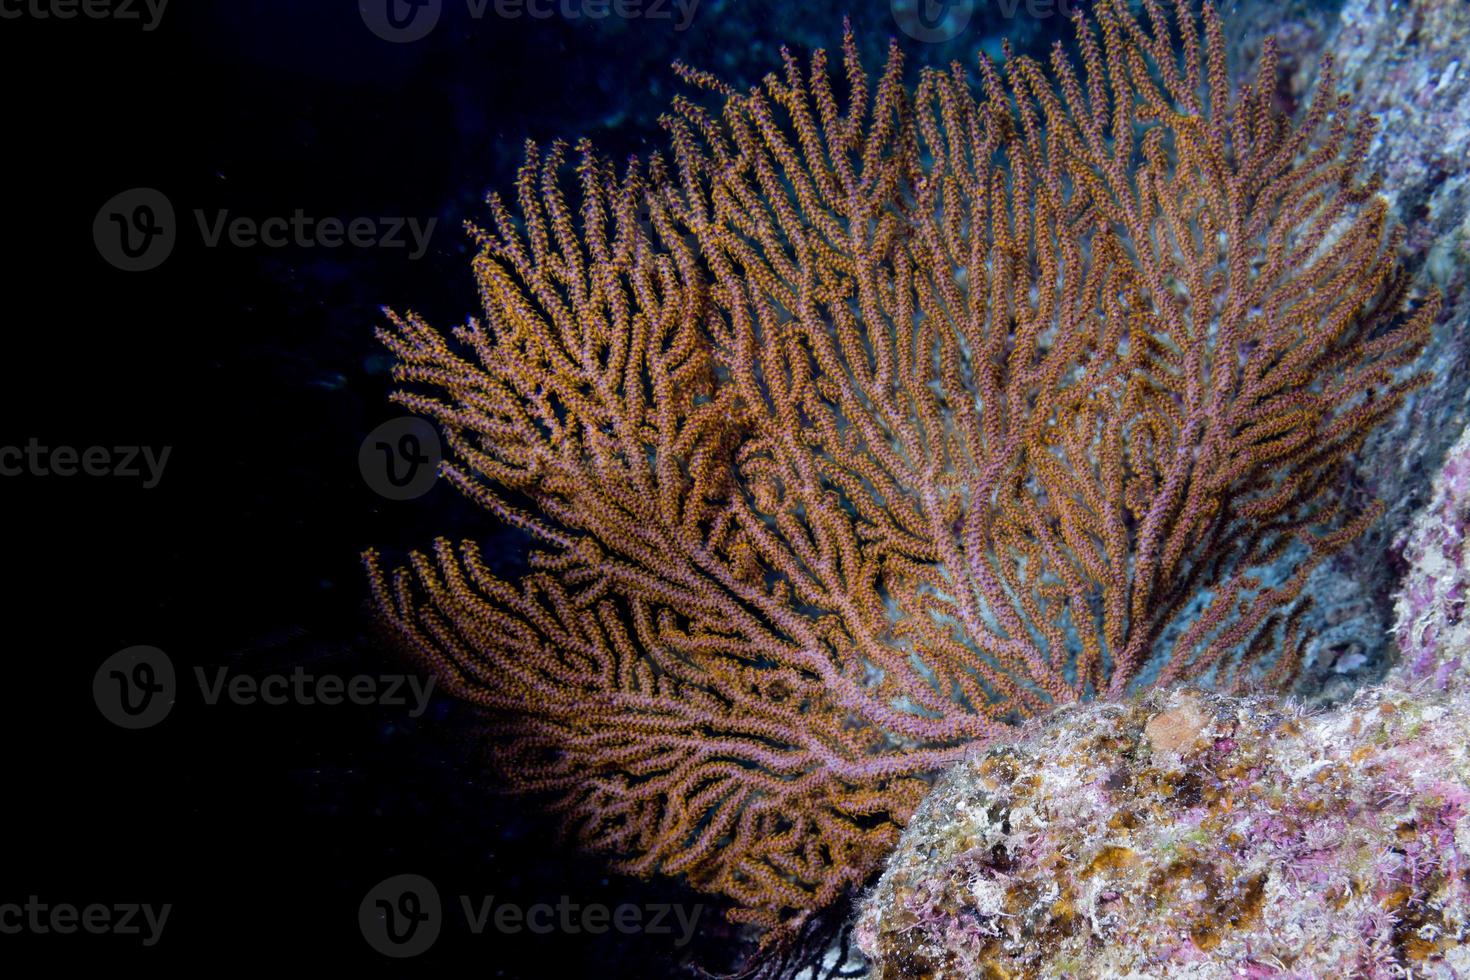 Gorgonia coral on the deep blue ocean photo